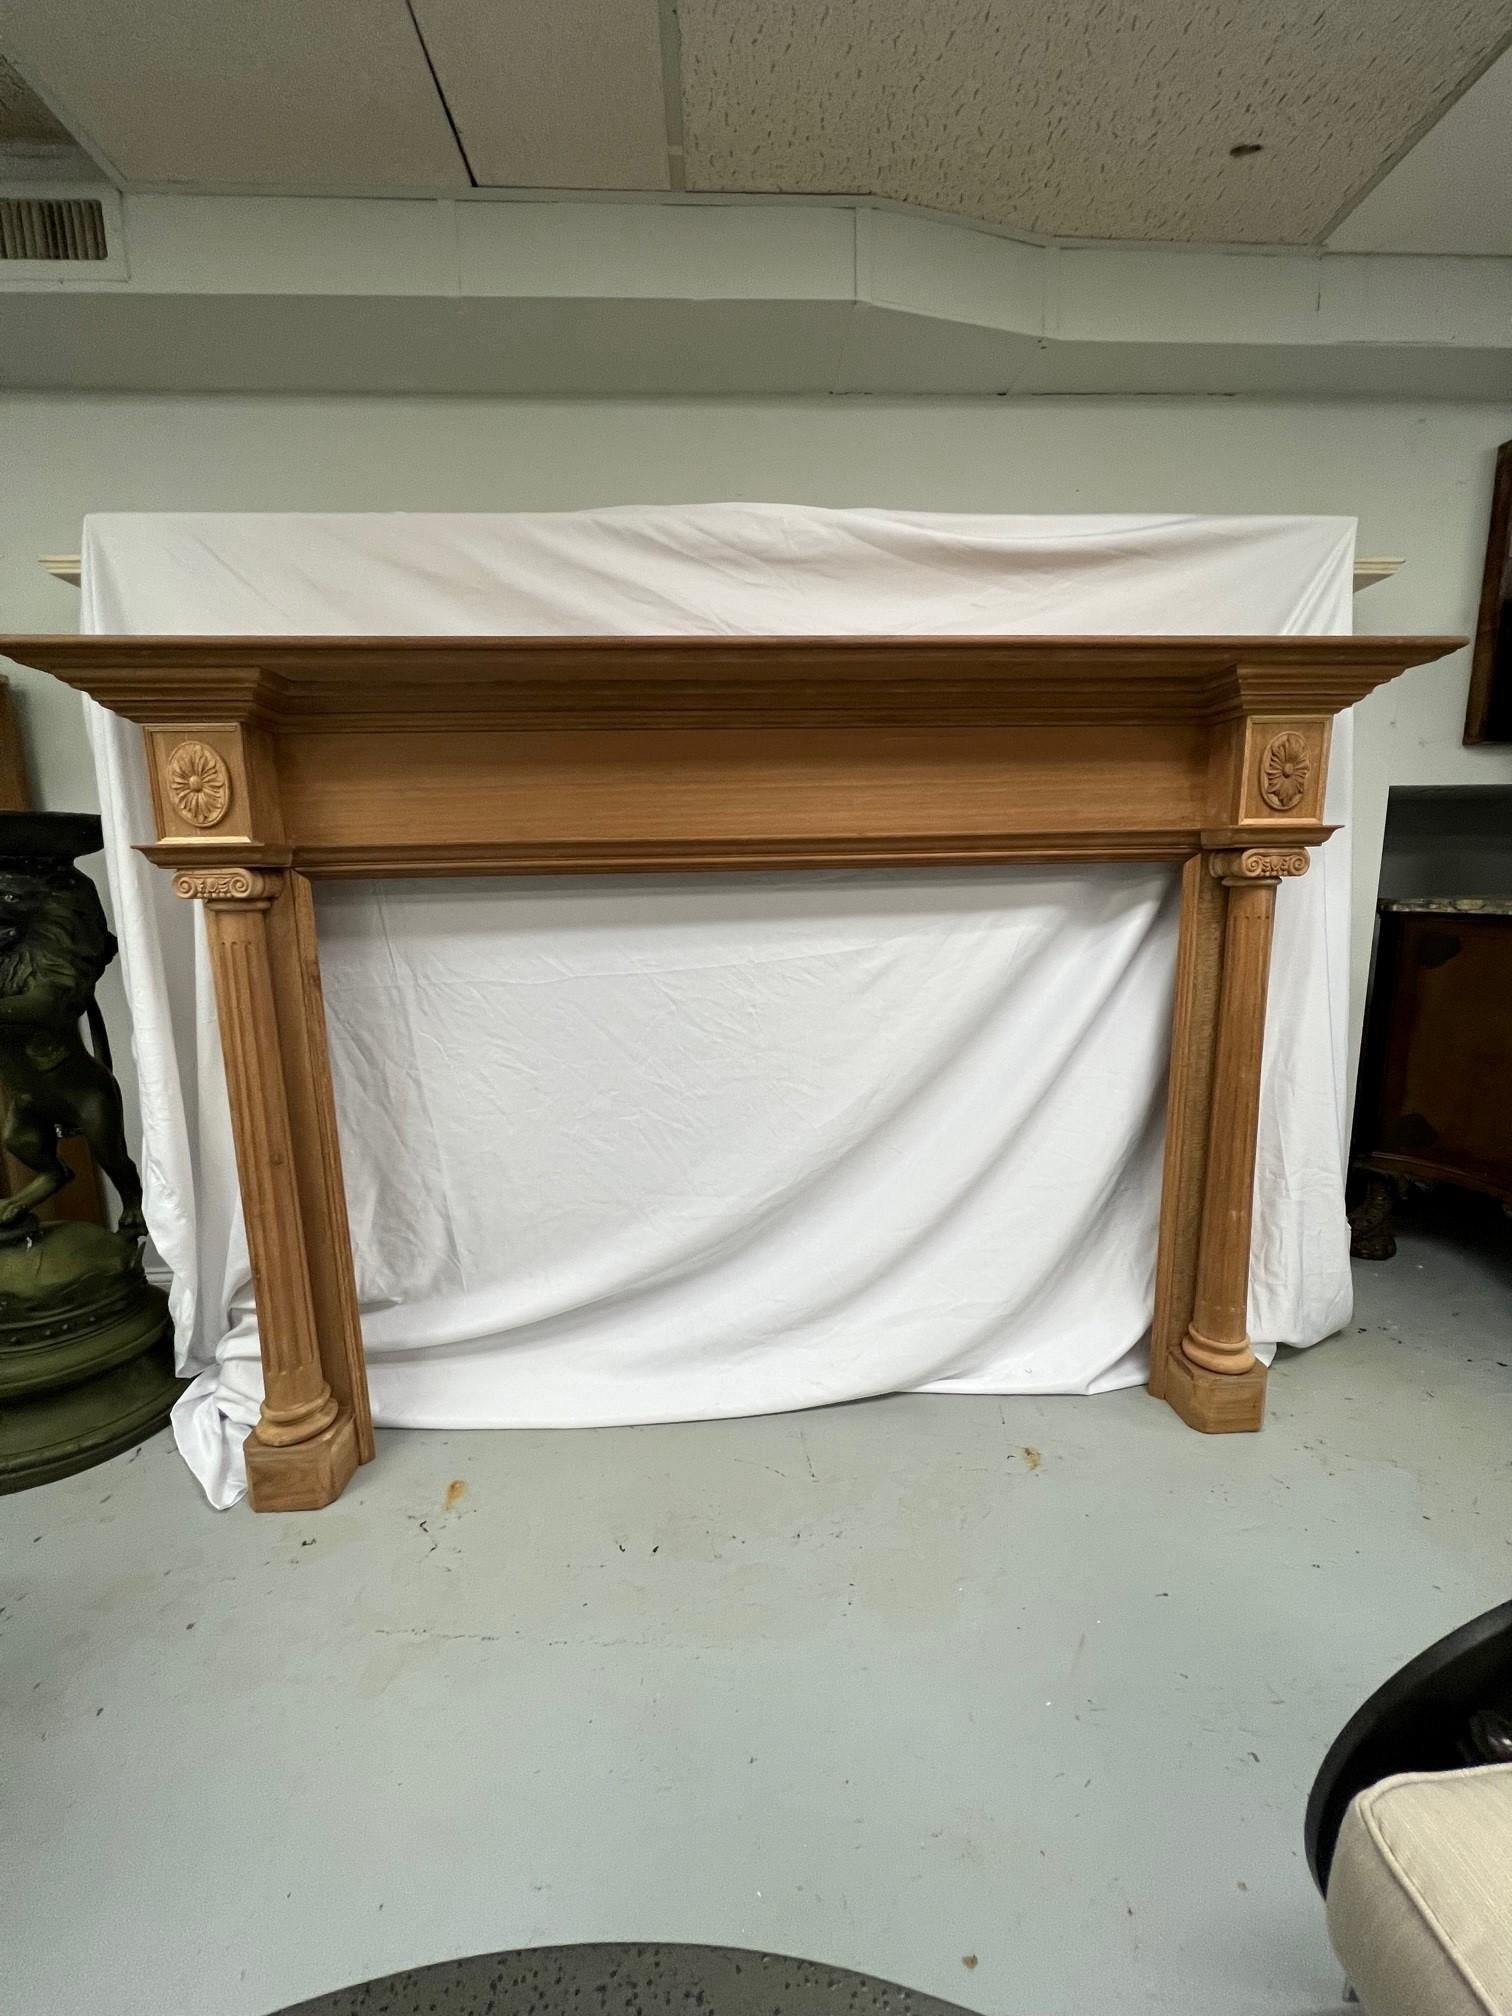 Reproduction wood fireplace mantel with fluted columns and carved capitals. Copied from an antique wood fireplace mantel sent to China before Corvid. This is a nice reproduction fireplace mantel made of Philippine mahogany and would look great